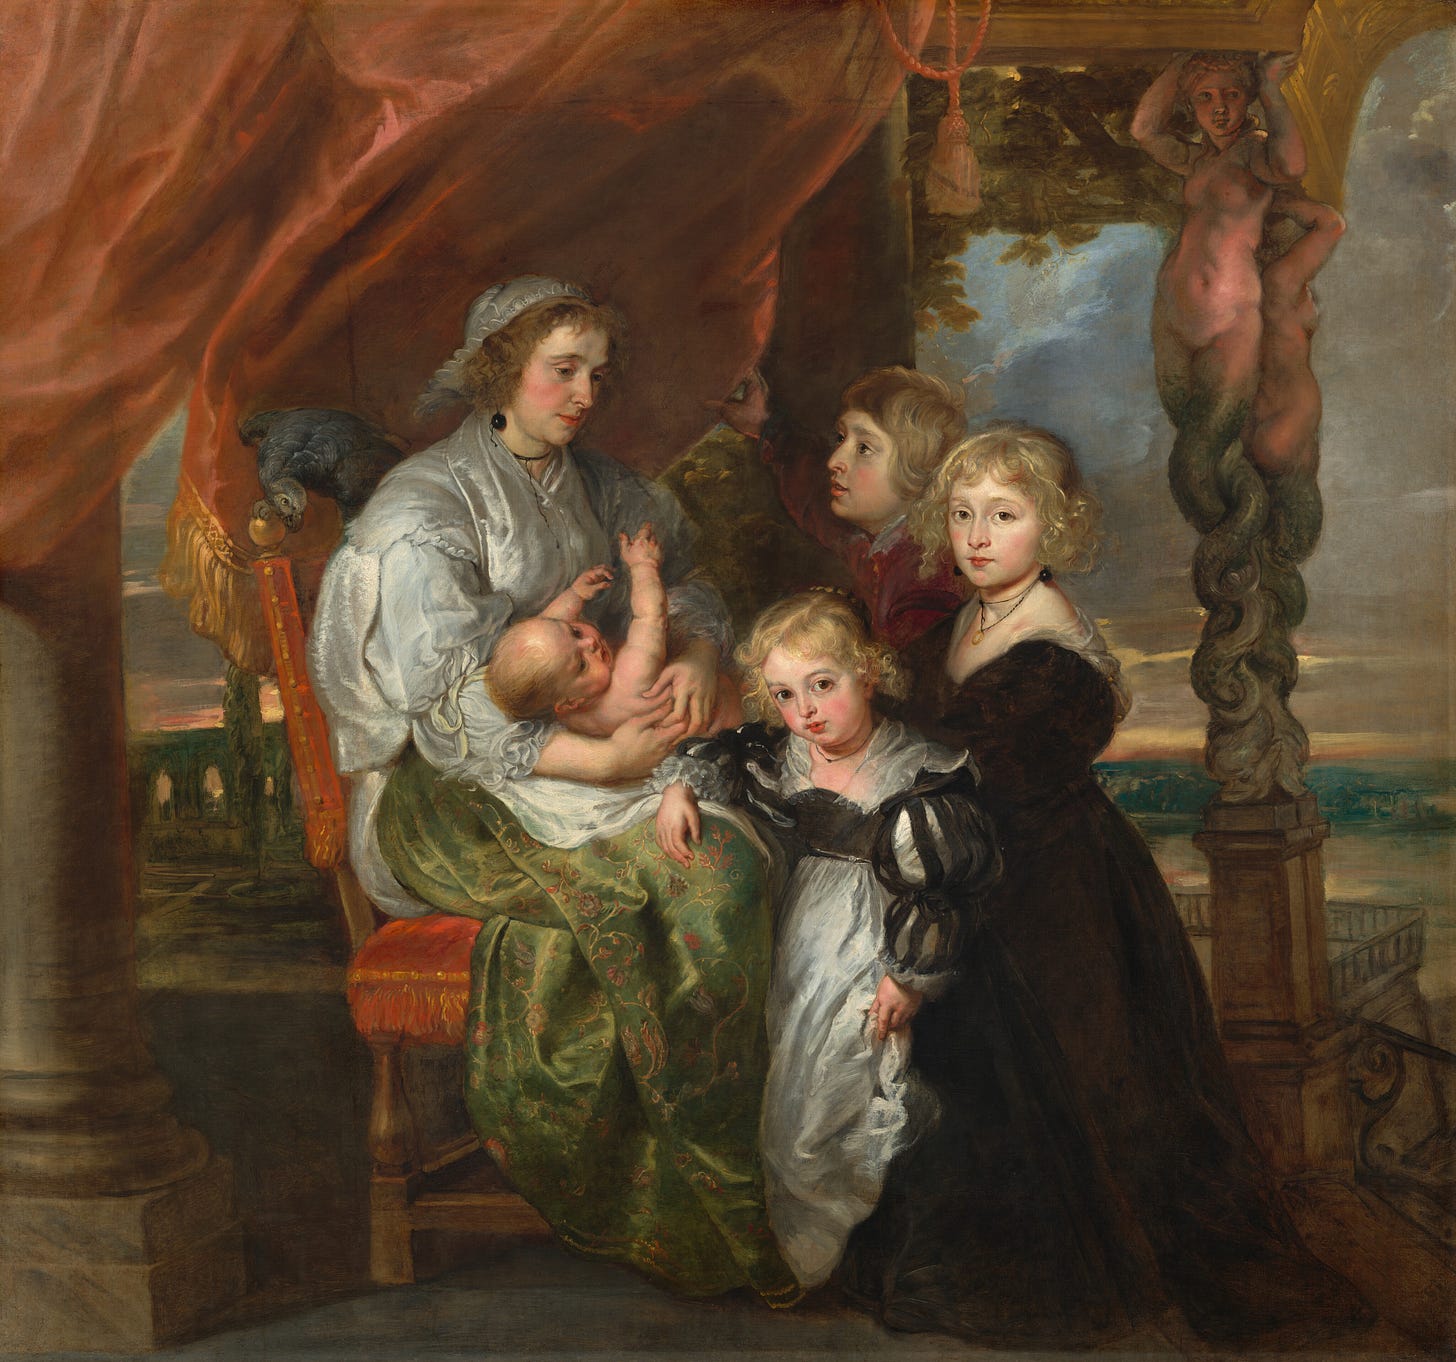 Deborah Kip, Wife of Sir Balthasar Gerbier, and Her Children, 1629/1630, reworked probably mid 1640s by Sir Peter Paul Rubens (and possibly Jacob Jordaens)